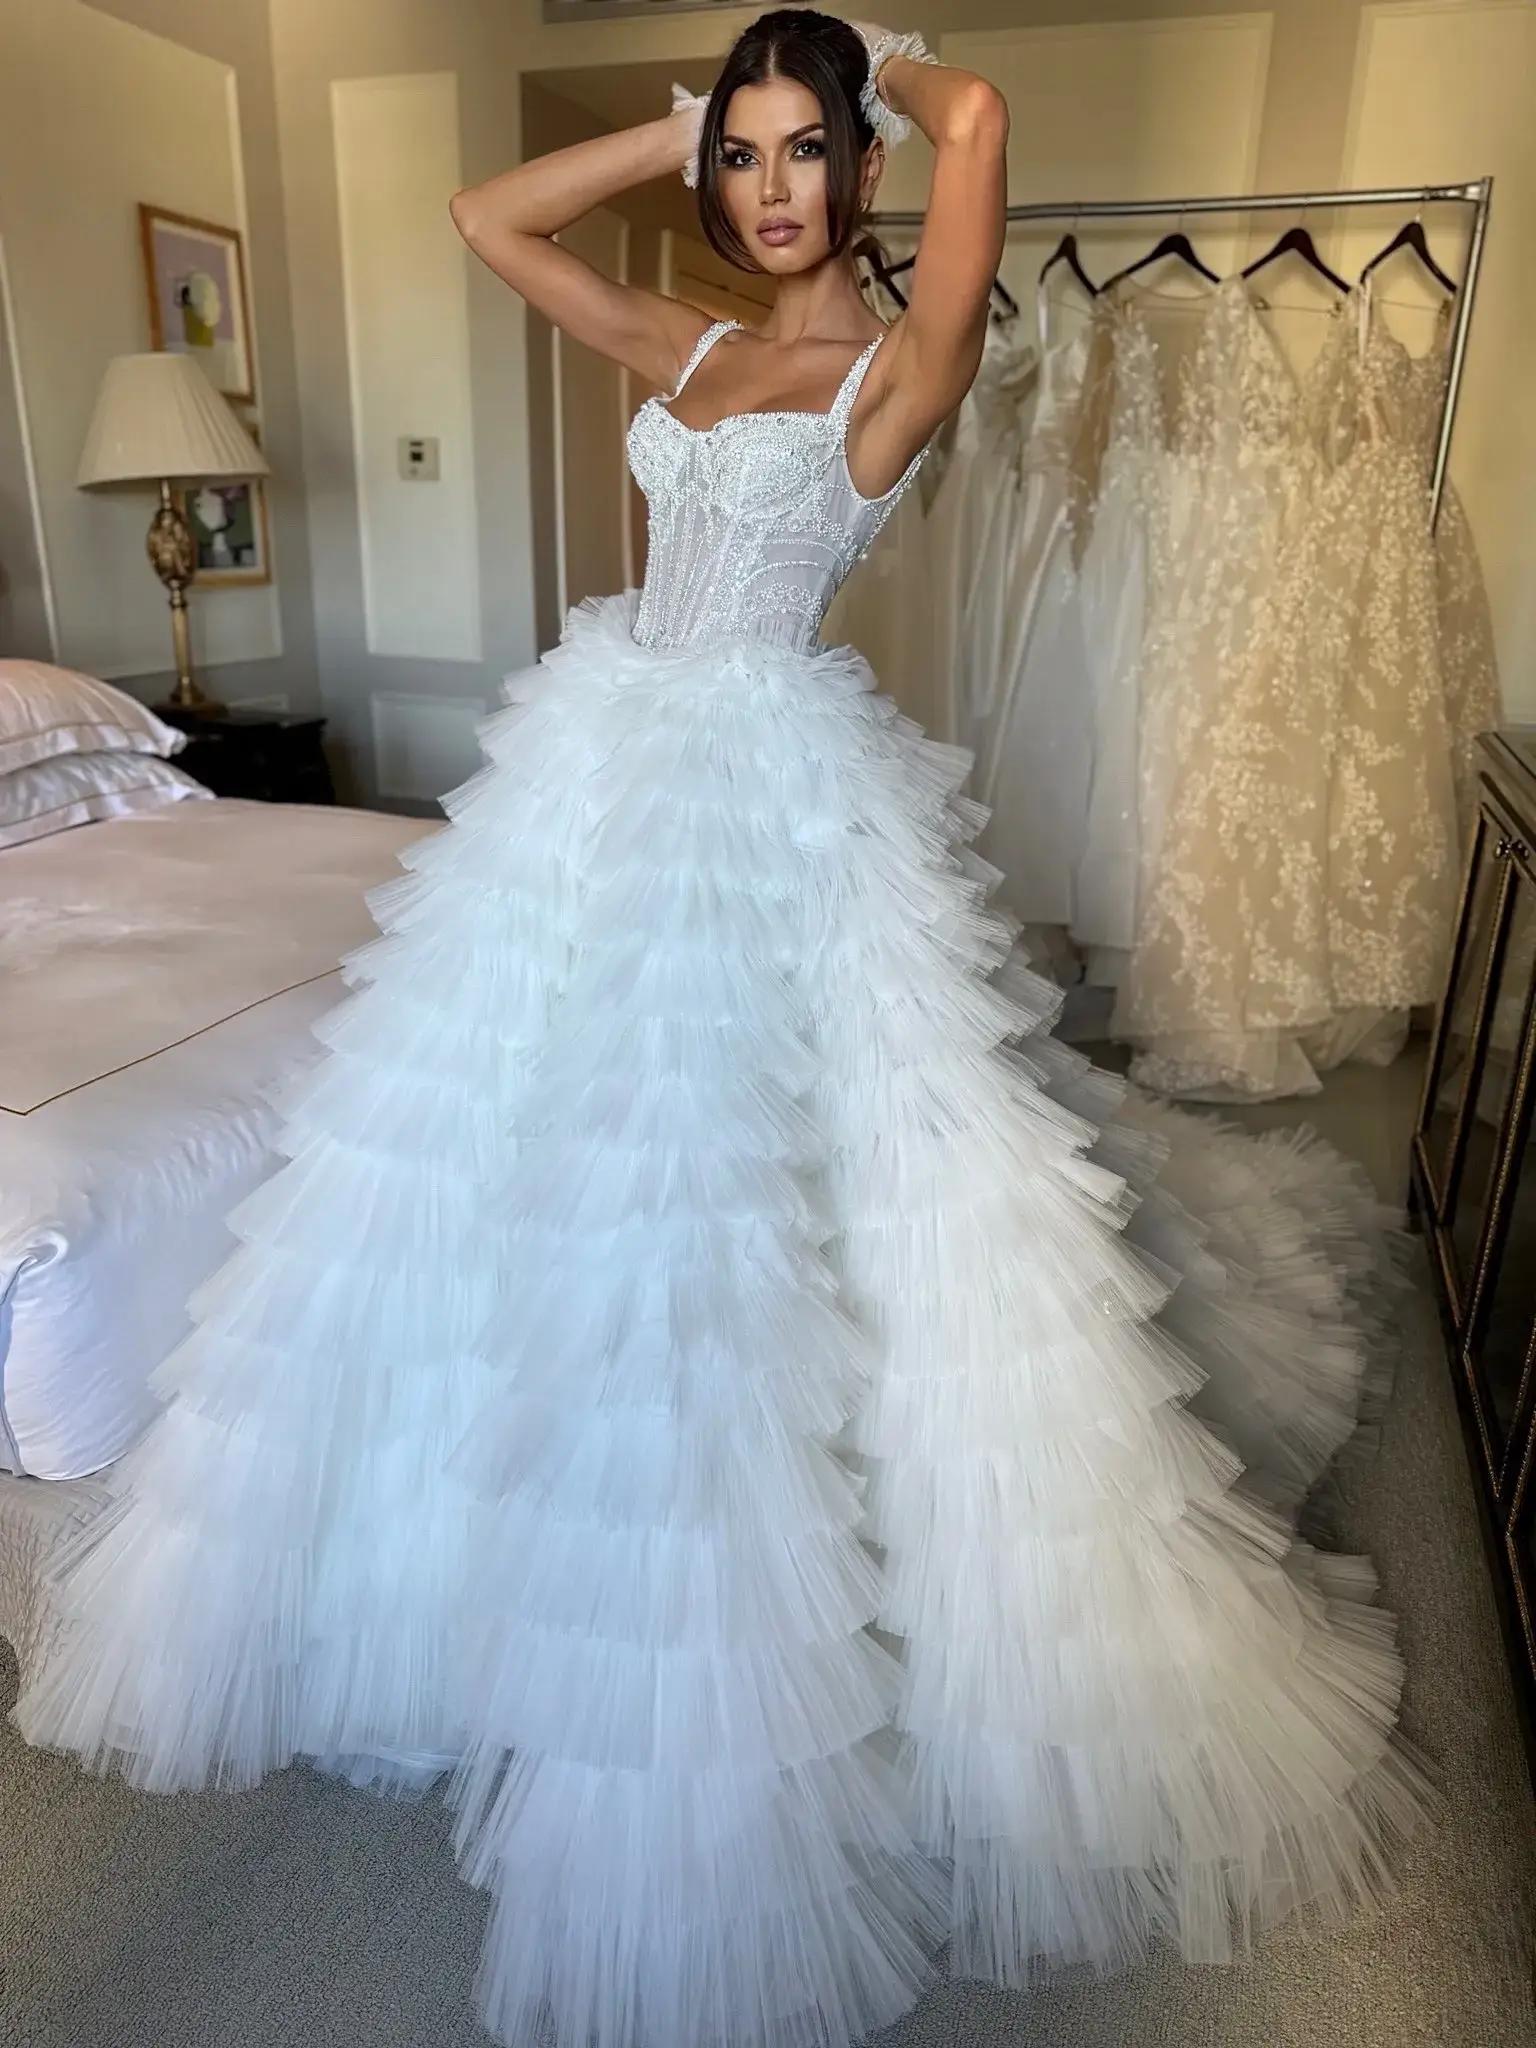 The Exquisite Gowns of Pallas Couture Privée at Iconic Bride Image